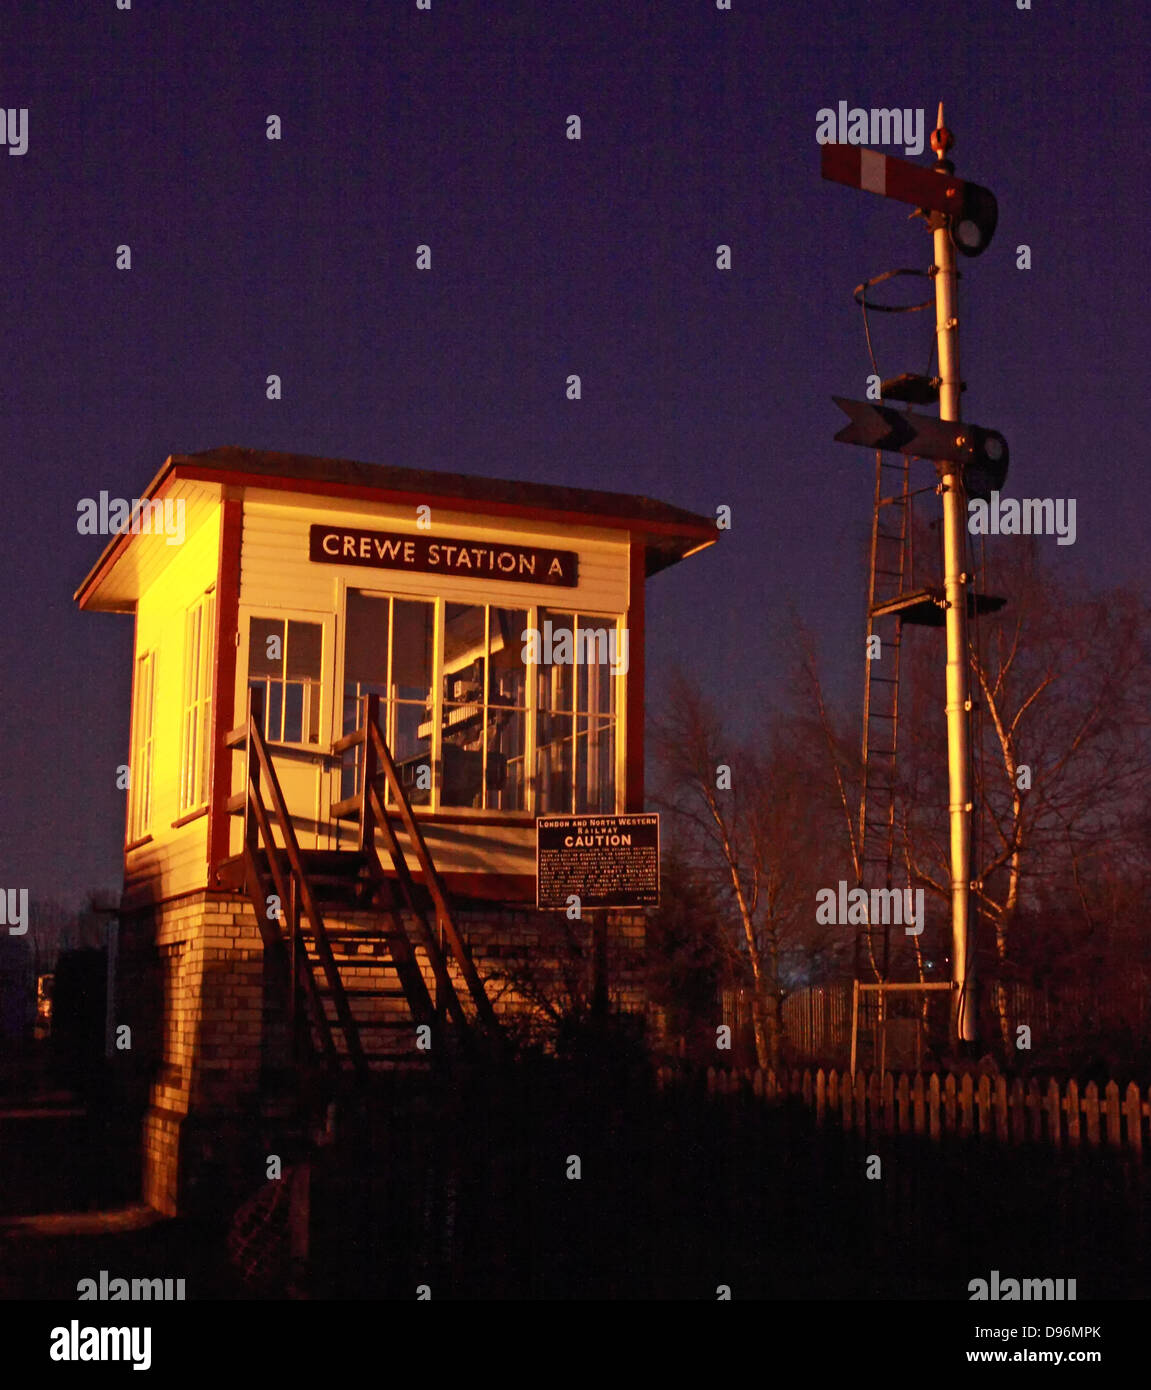 Crewe Station A, old preserved signal box, at Dusk, Cheshire England, UK, CW1 2DB Stock Photo